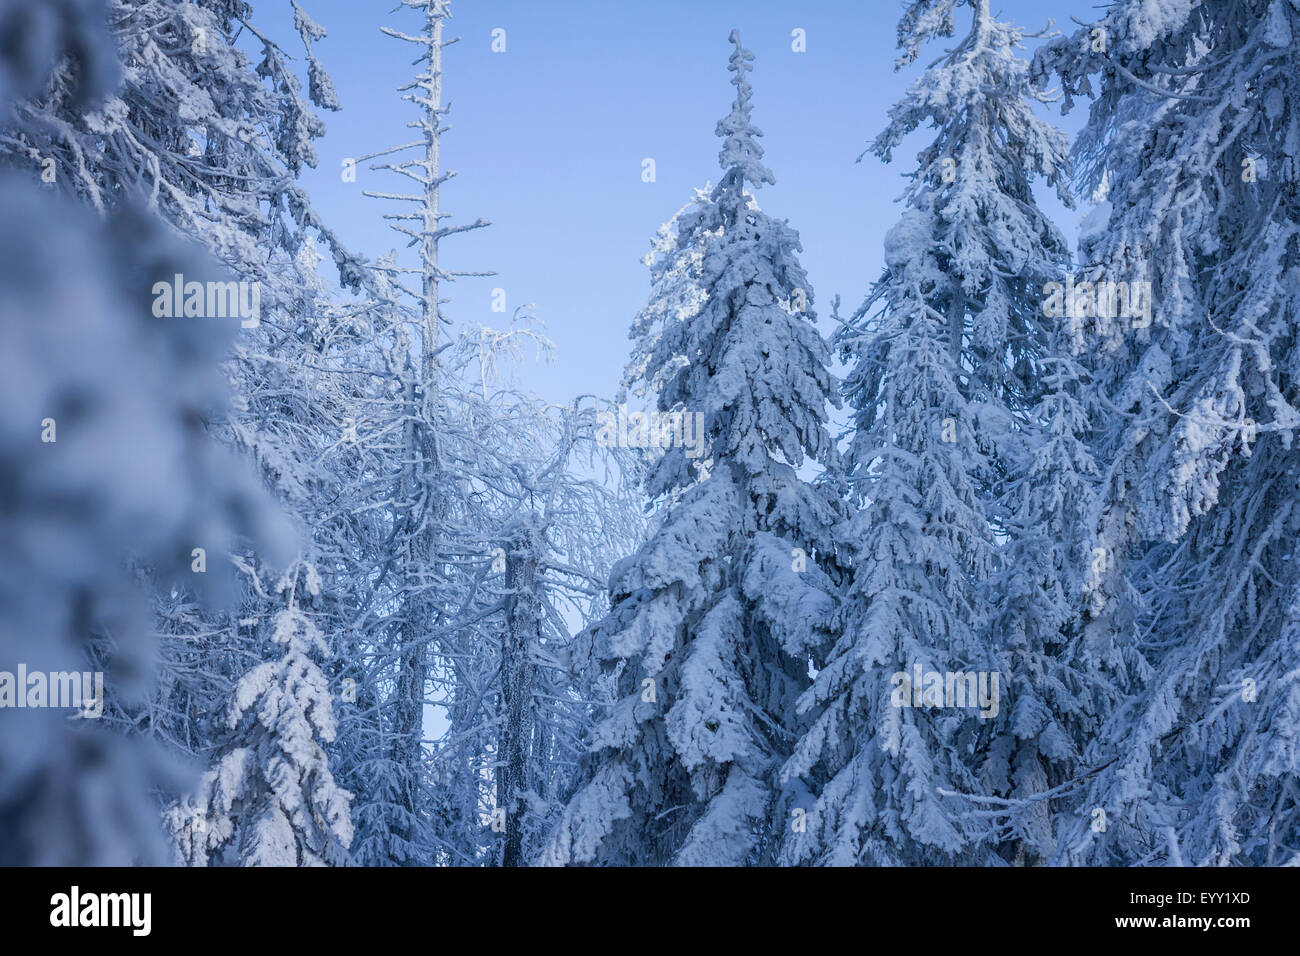 Trees in snowy forest Stock Photo